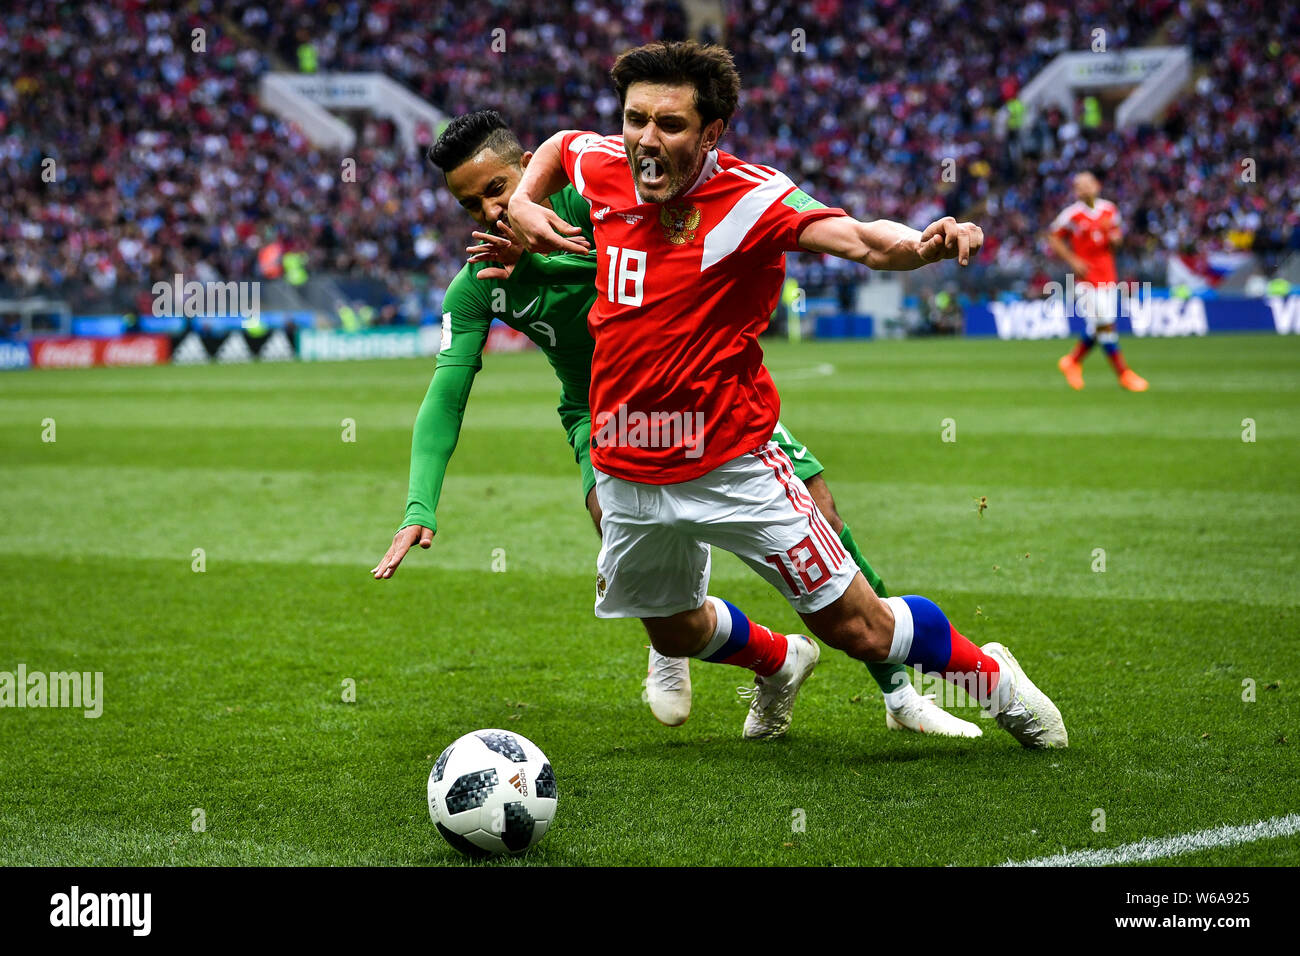 Yuri Zhirkov of Russia, right, challenges a player of Saudi Arabia in their Group A match during the 2018 FIFA World Cup in Moscow, Russia, 14 June 20 Stock Photo